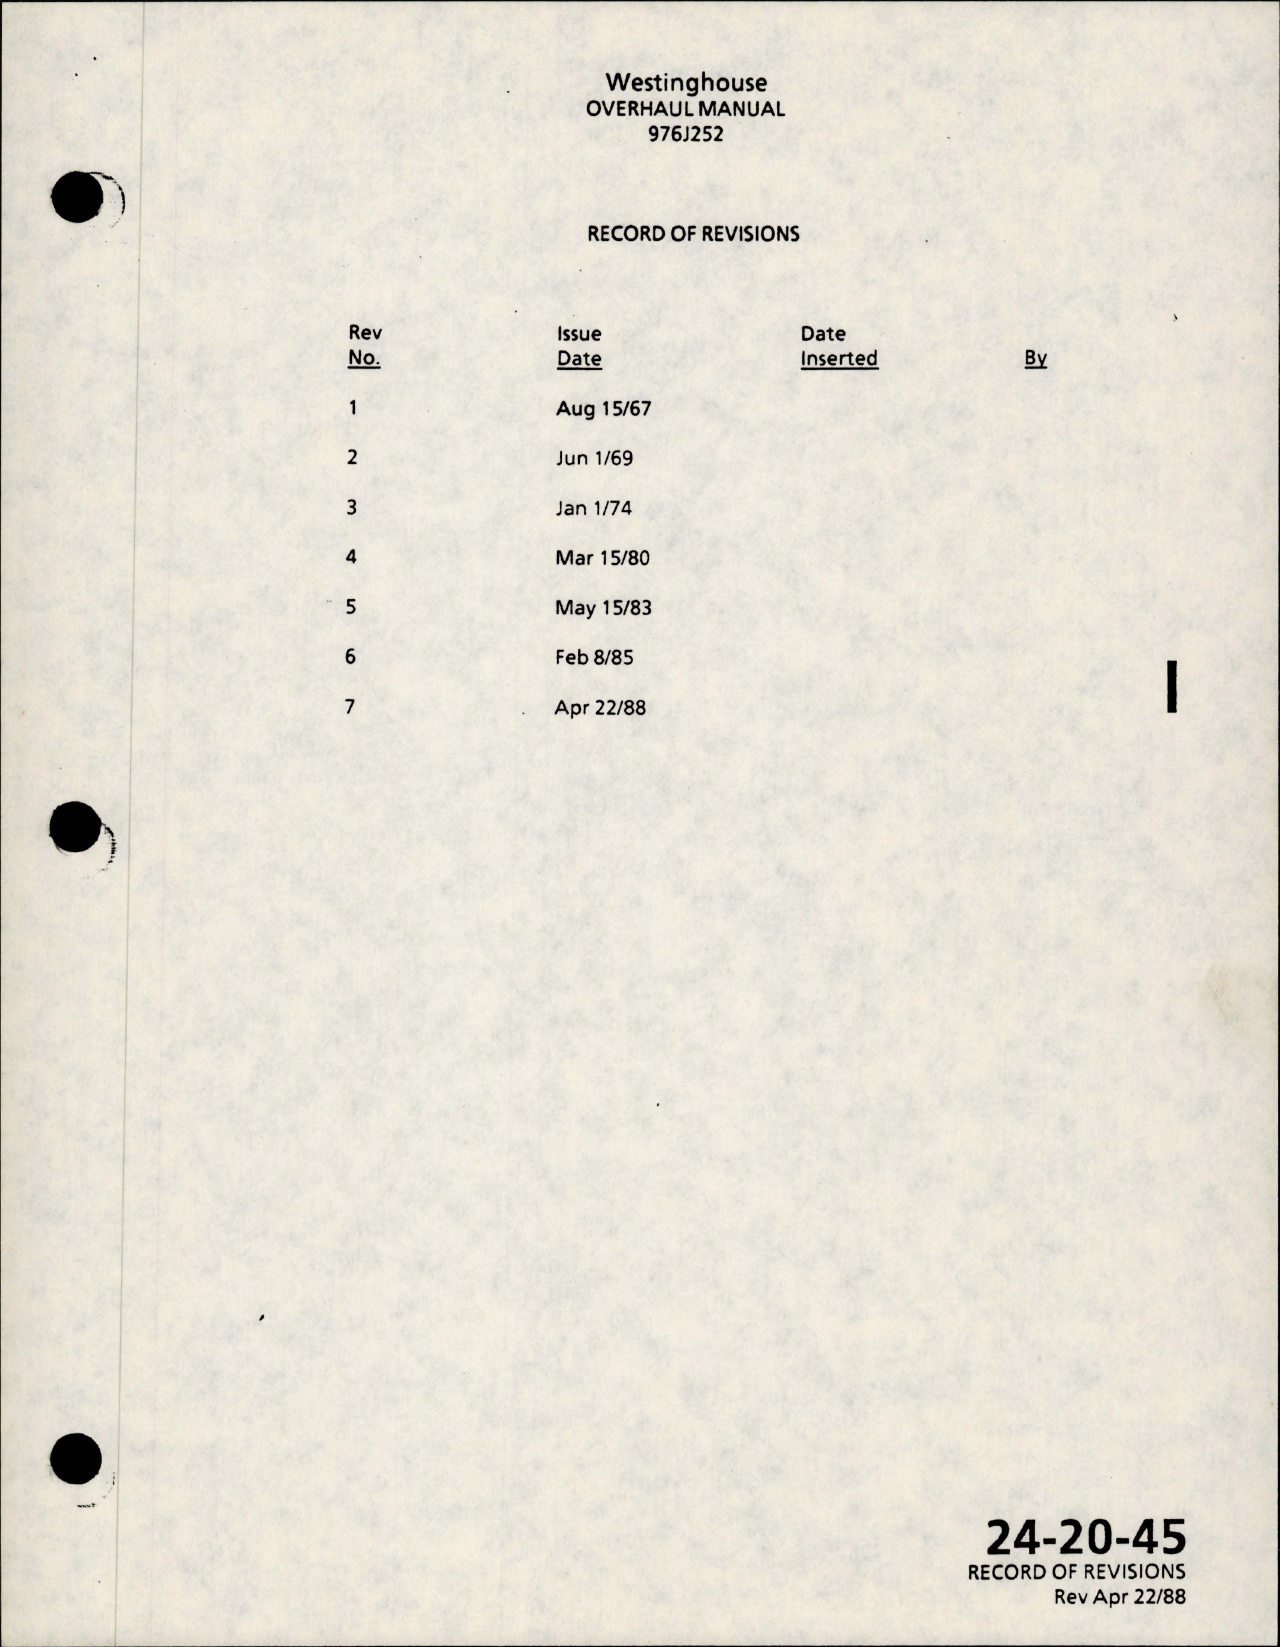 Sample page 7 from AirCorps Library document: Maintenance Manual w Parts List for AC Generator - Parts 976J252-3 and 976J252-6